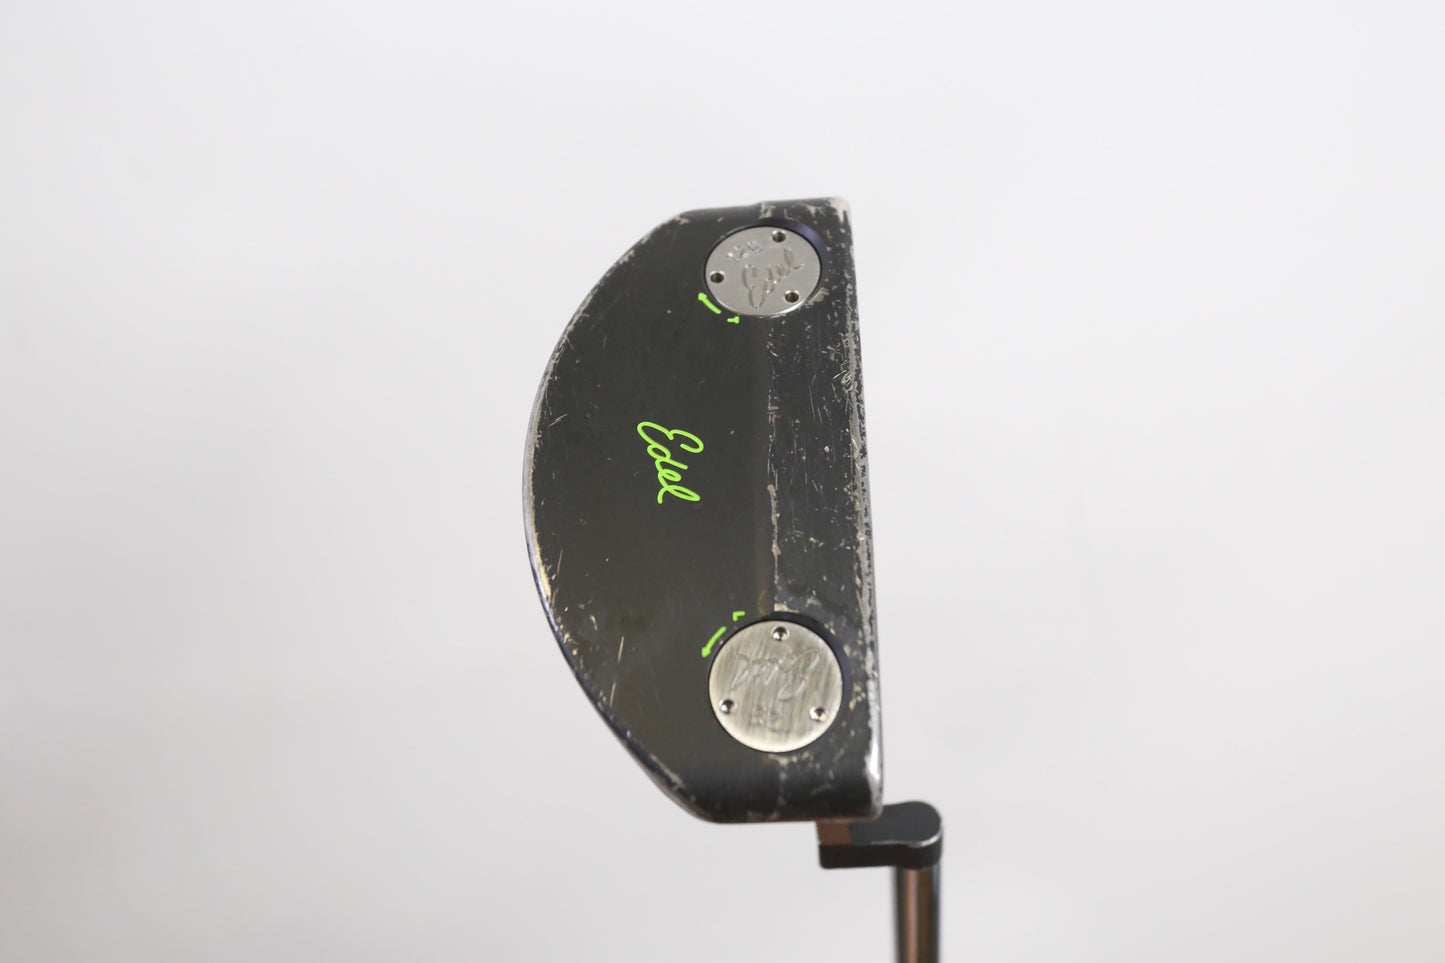 Used Edel Standard Series Mallet Custom "T Bart" with Pixel Putter - Right-Handed - 34 in - Mid-mallet